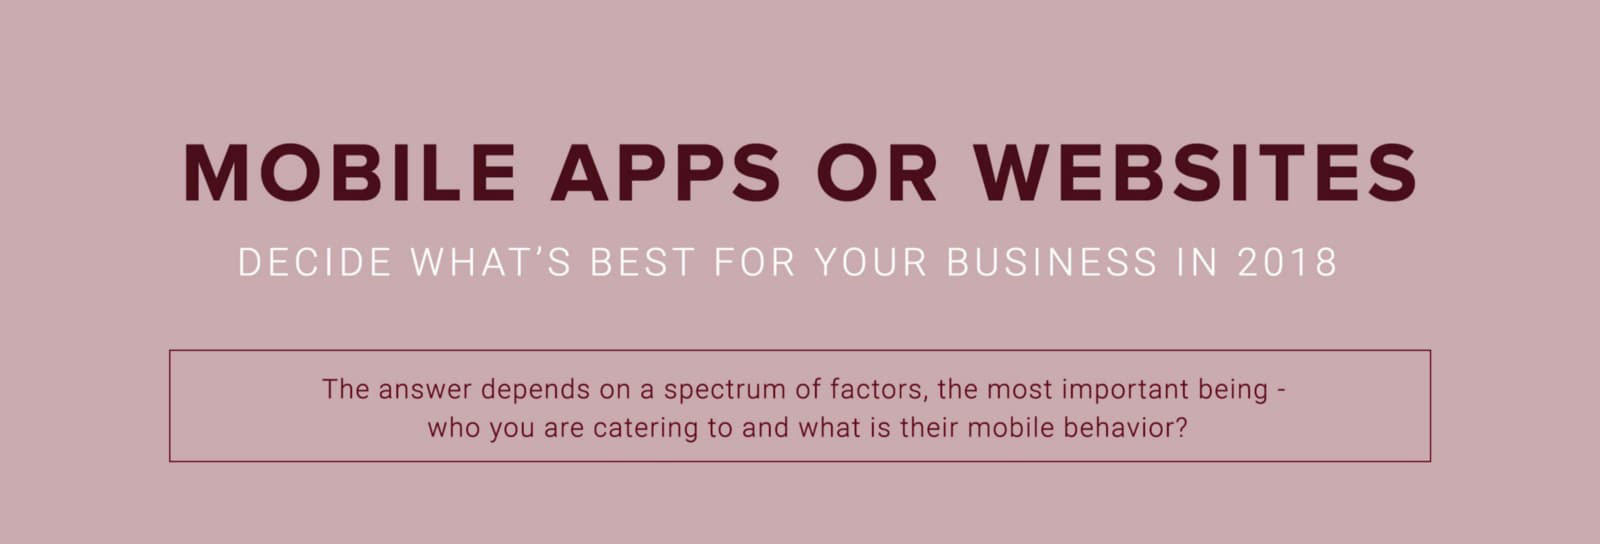 Mobile App or Mobile Website — Which One Does Your Business Need in 2018?